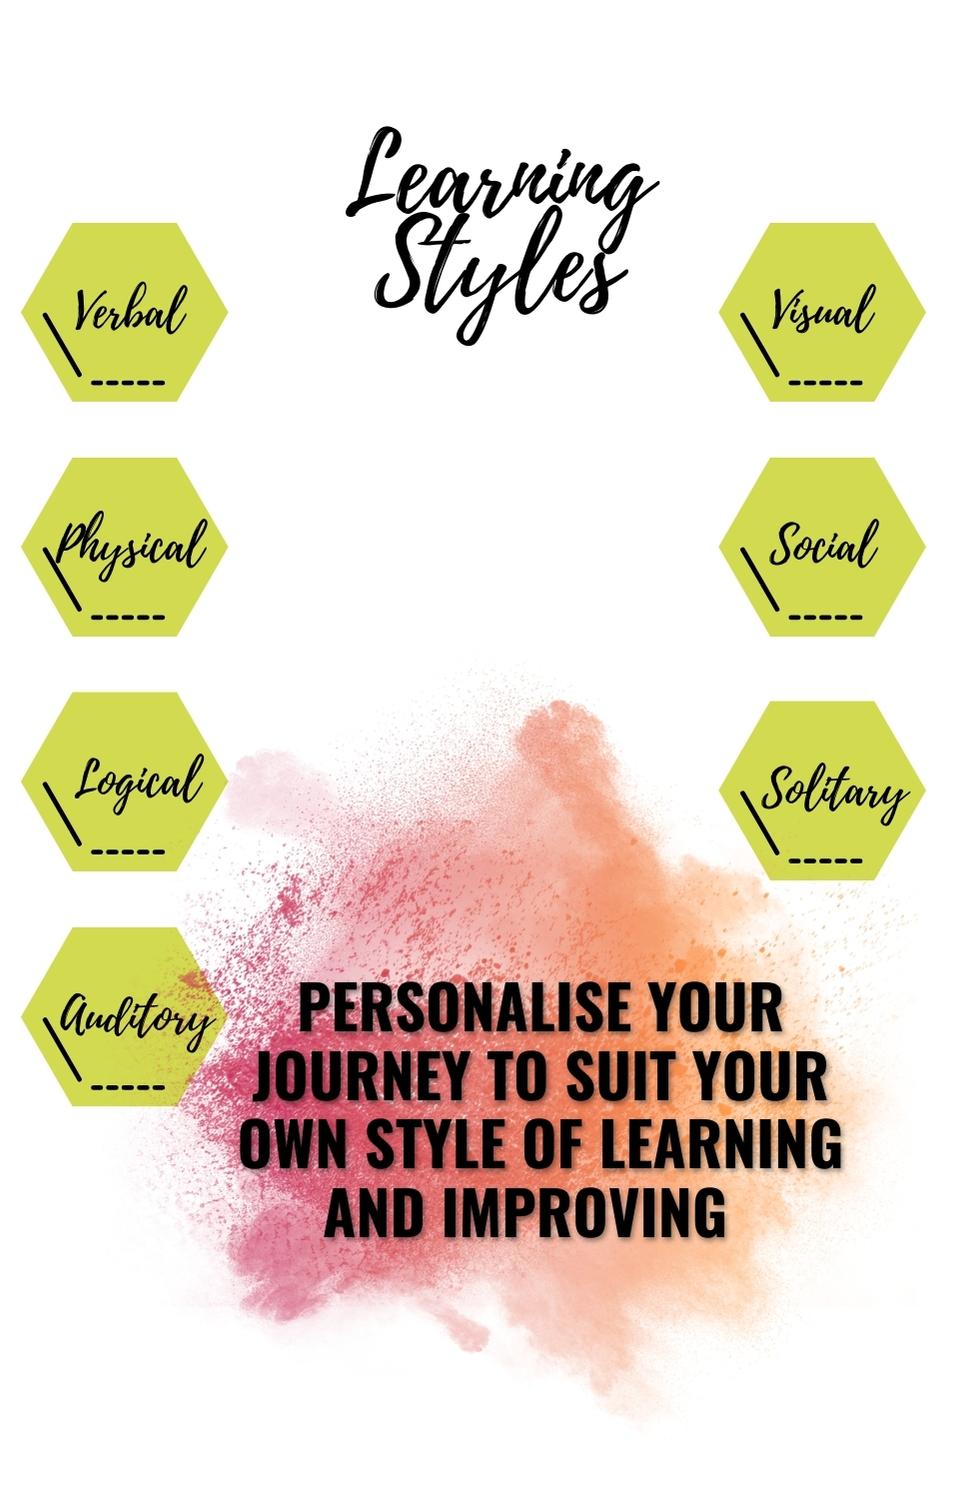 The psychology of learning styles